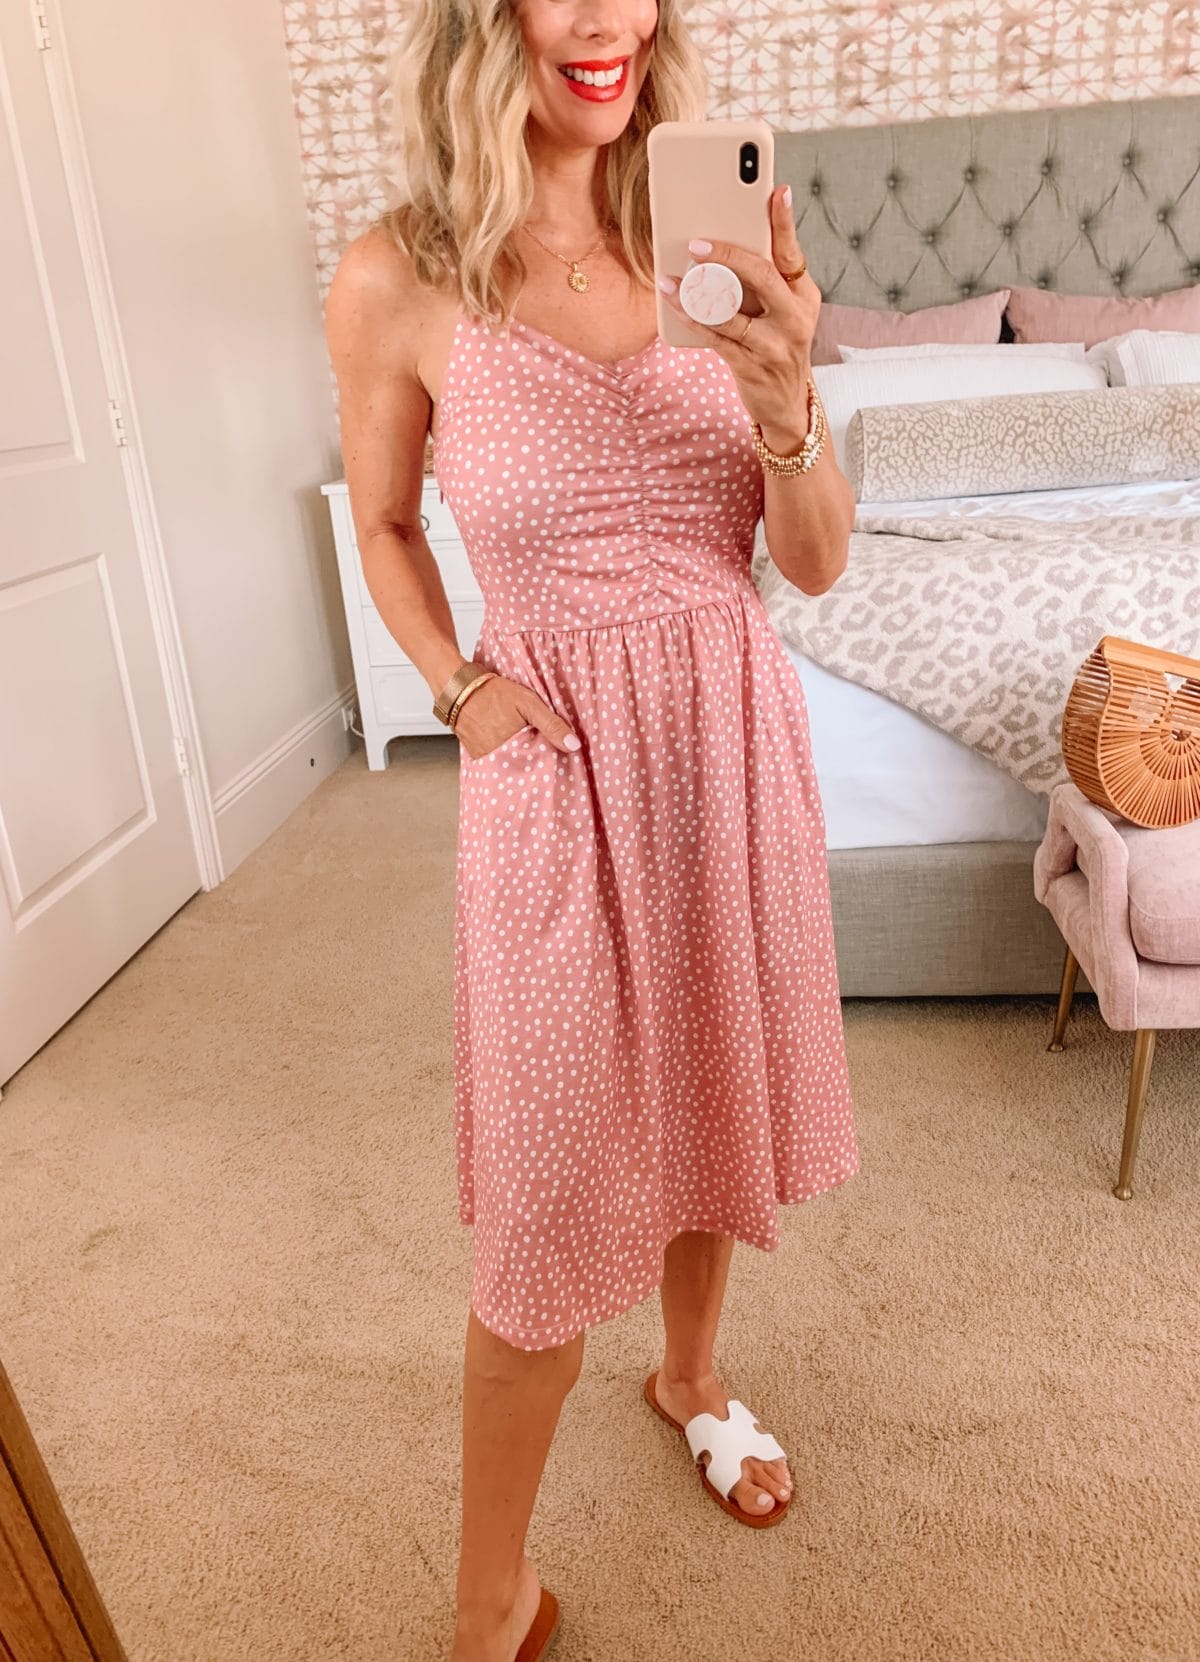 Amazon Fashion Faves, Pink Polka Dot Dress and Sandals with Bamboo Clutch 